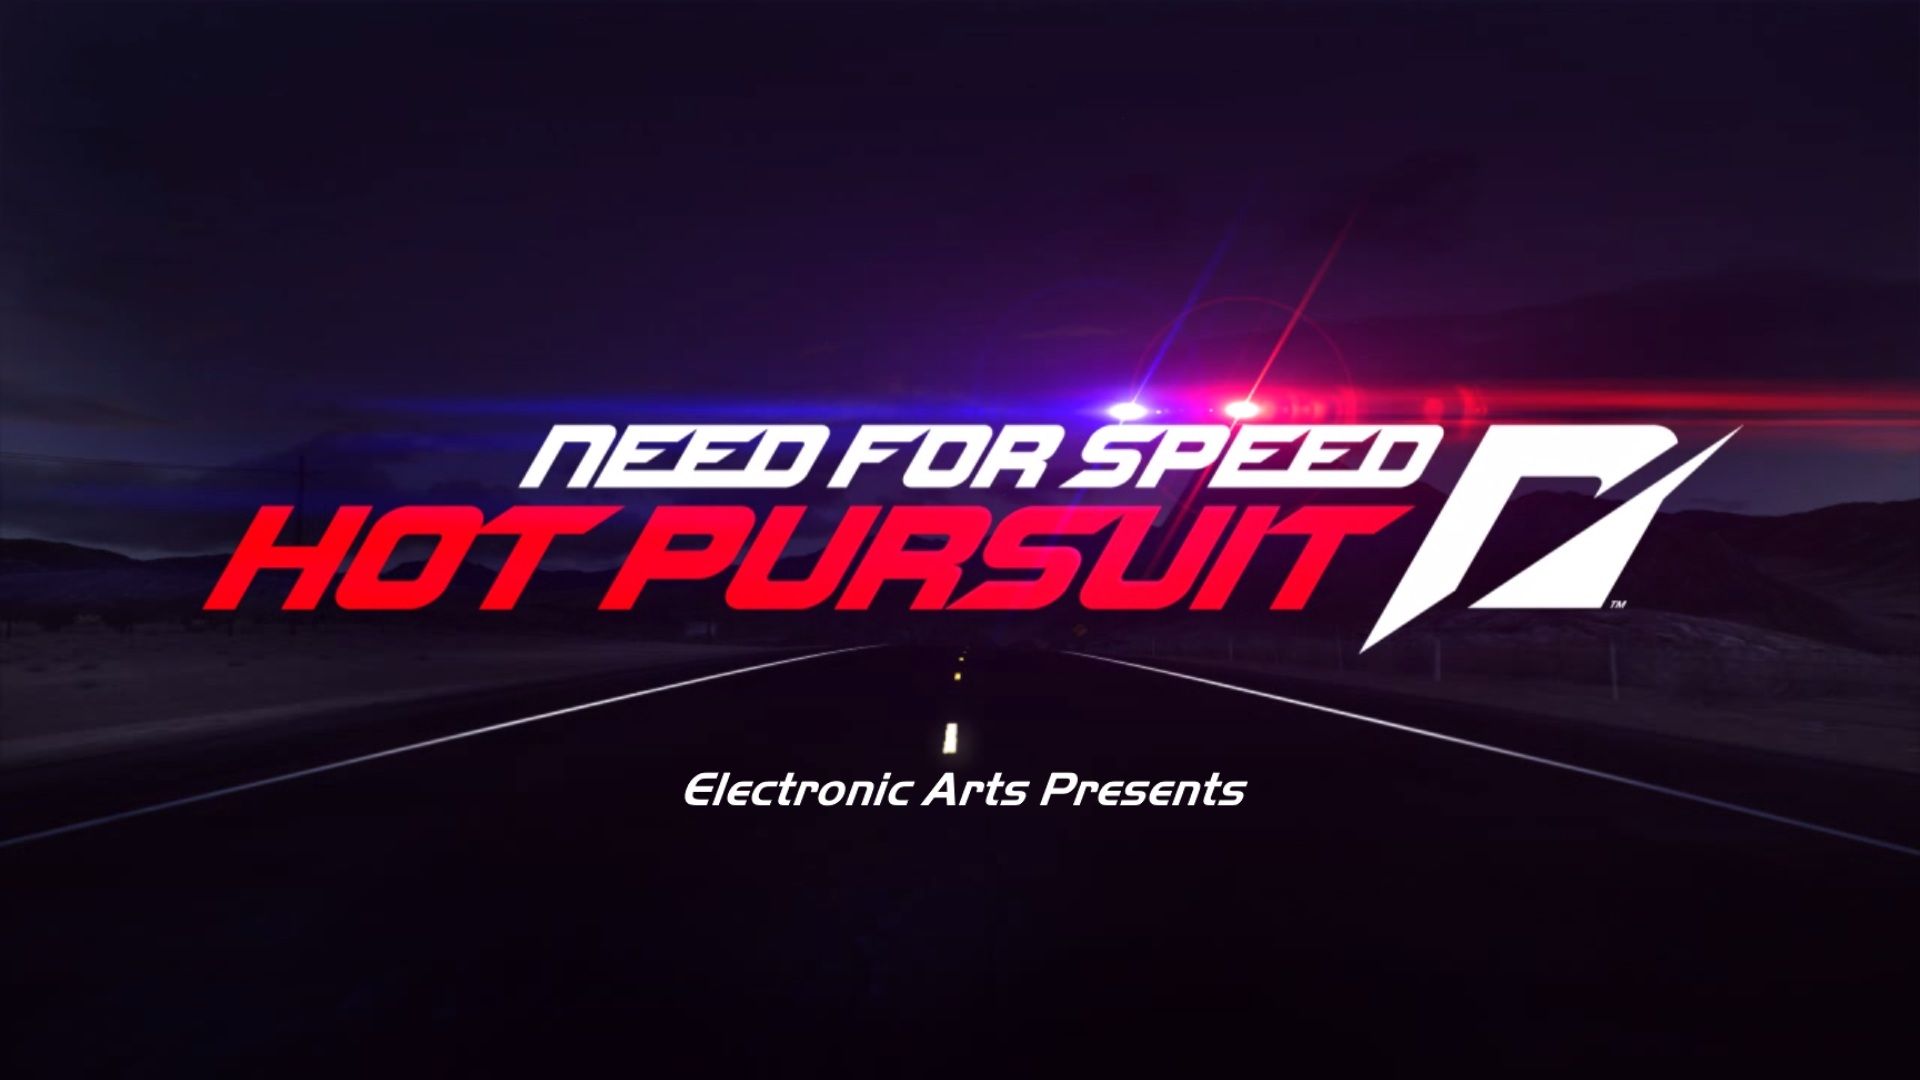 Need For Speed Hot Pursuit (Wallpaper)